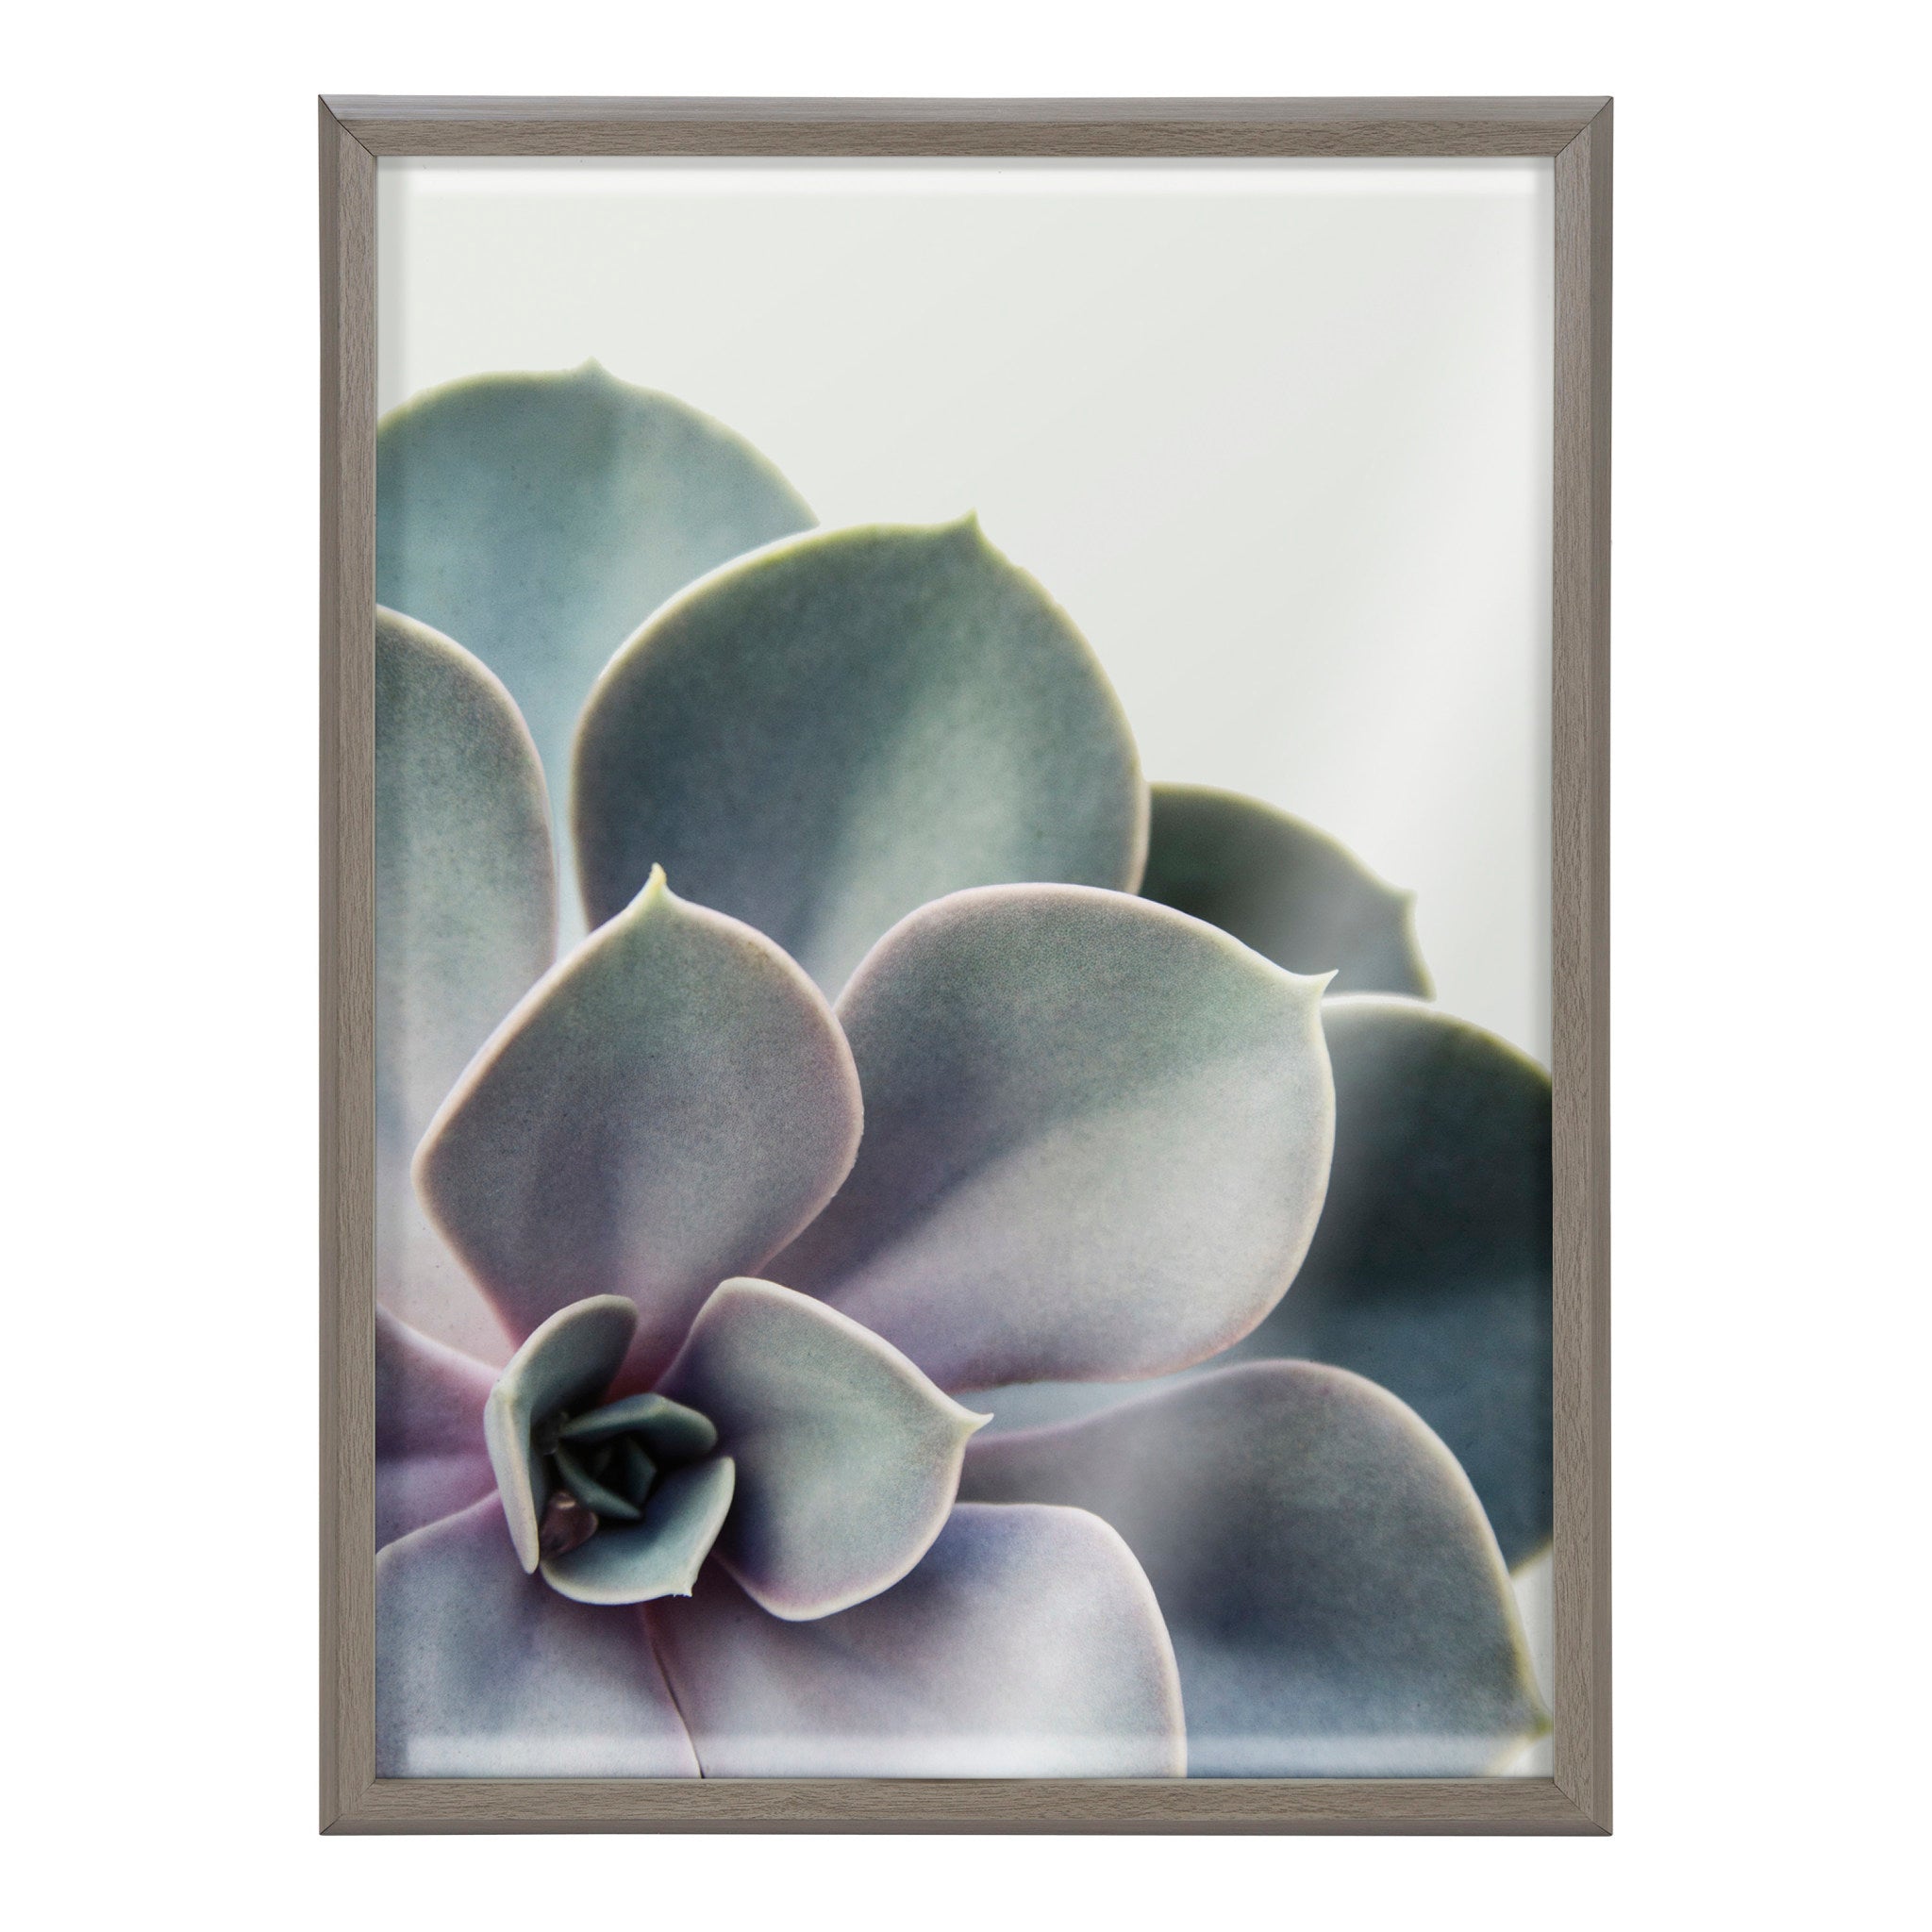 Blake Succulent 5 Framed Printed Glass by Emiko and Mark Franzen of F2Images